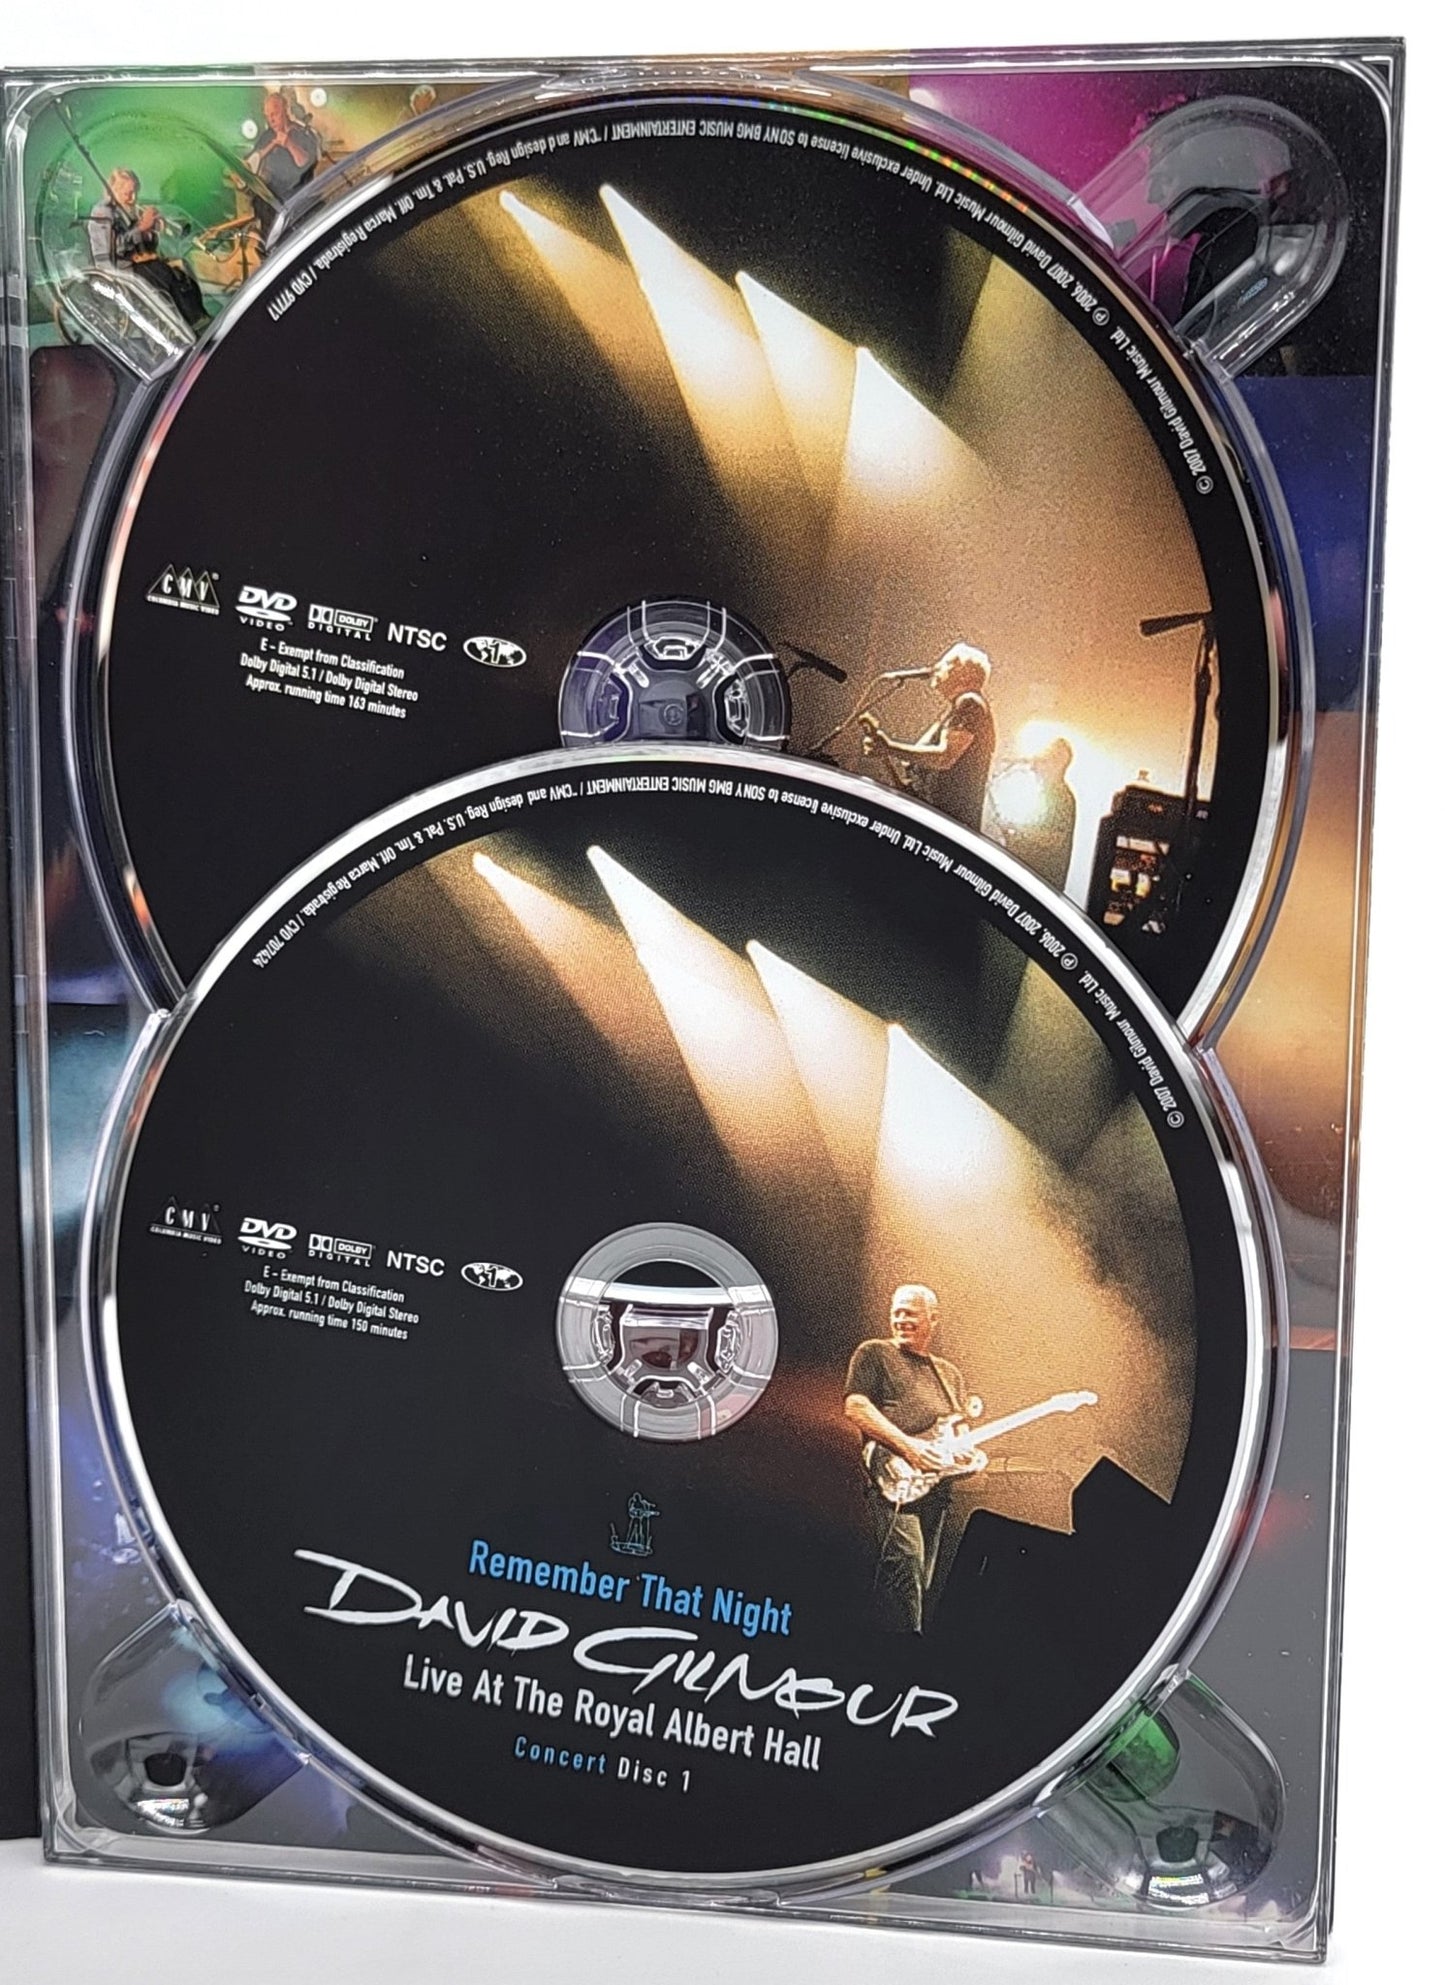 Steady Bunny Shop - David Gilmour - Remember That Night | DVD | Live at the Royal Albert Hall -2 Disc set - DVD - Steady Bunny Shop